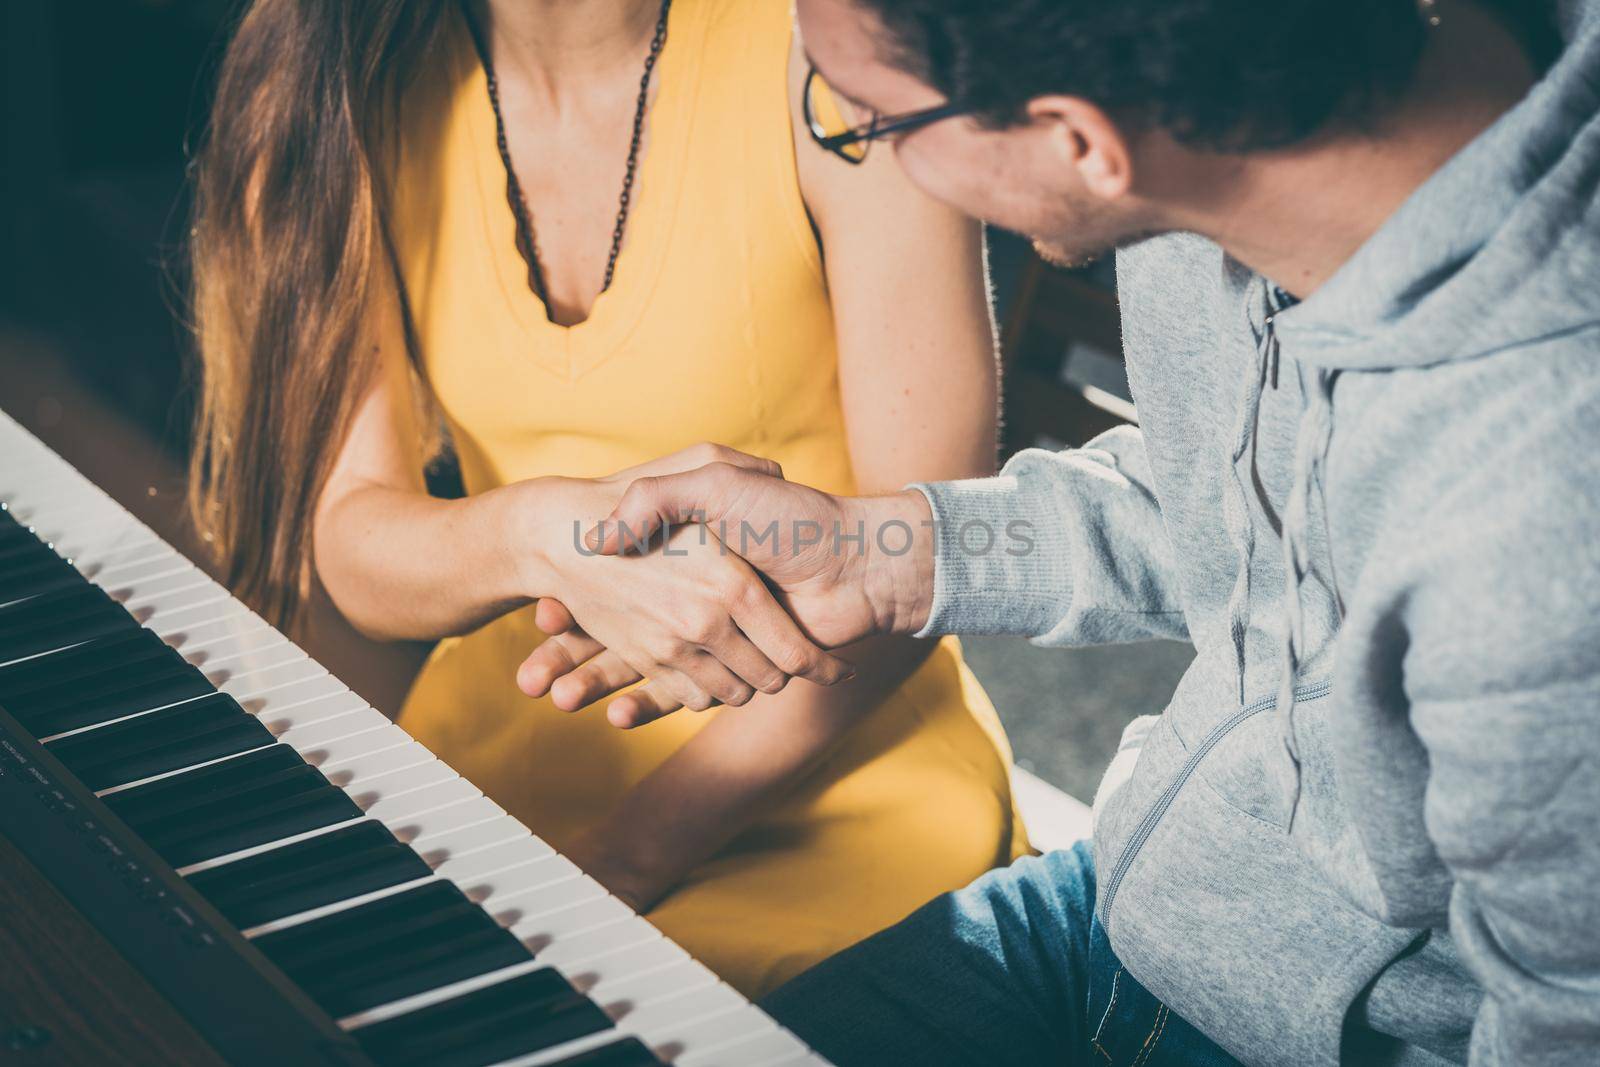 Piano teacher and student shaking hands after lesson by Kzenon